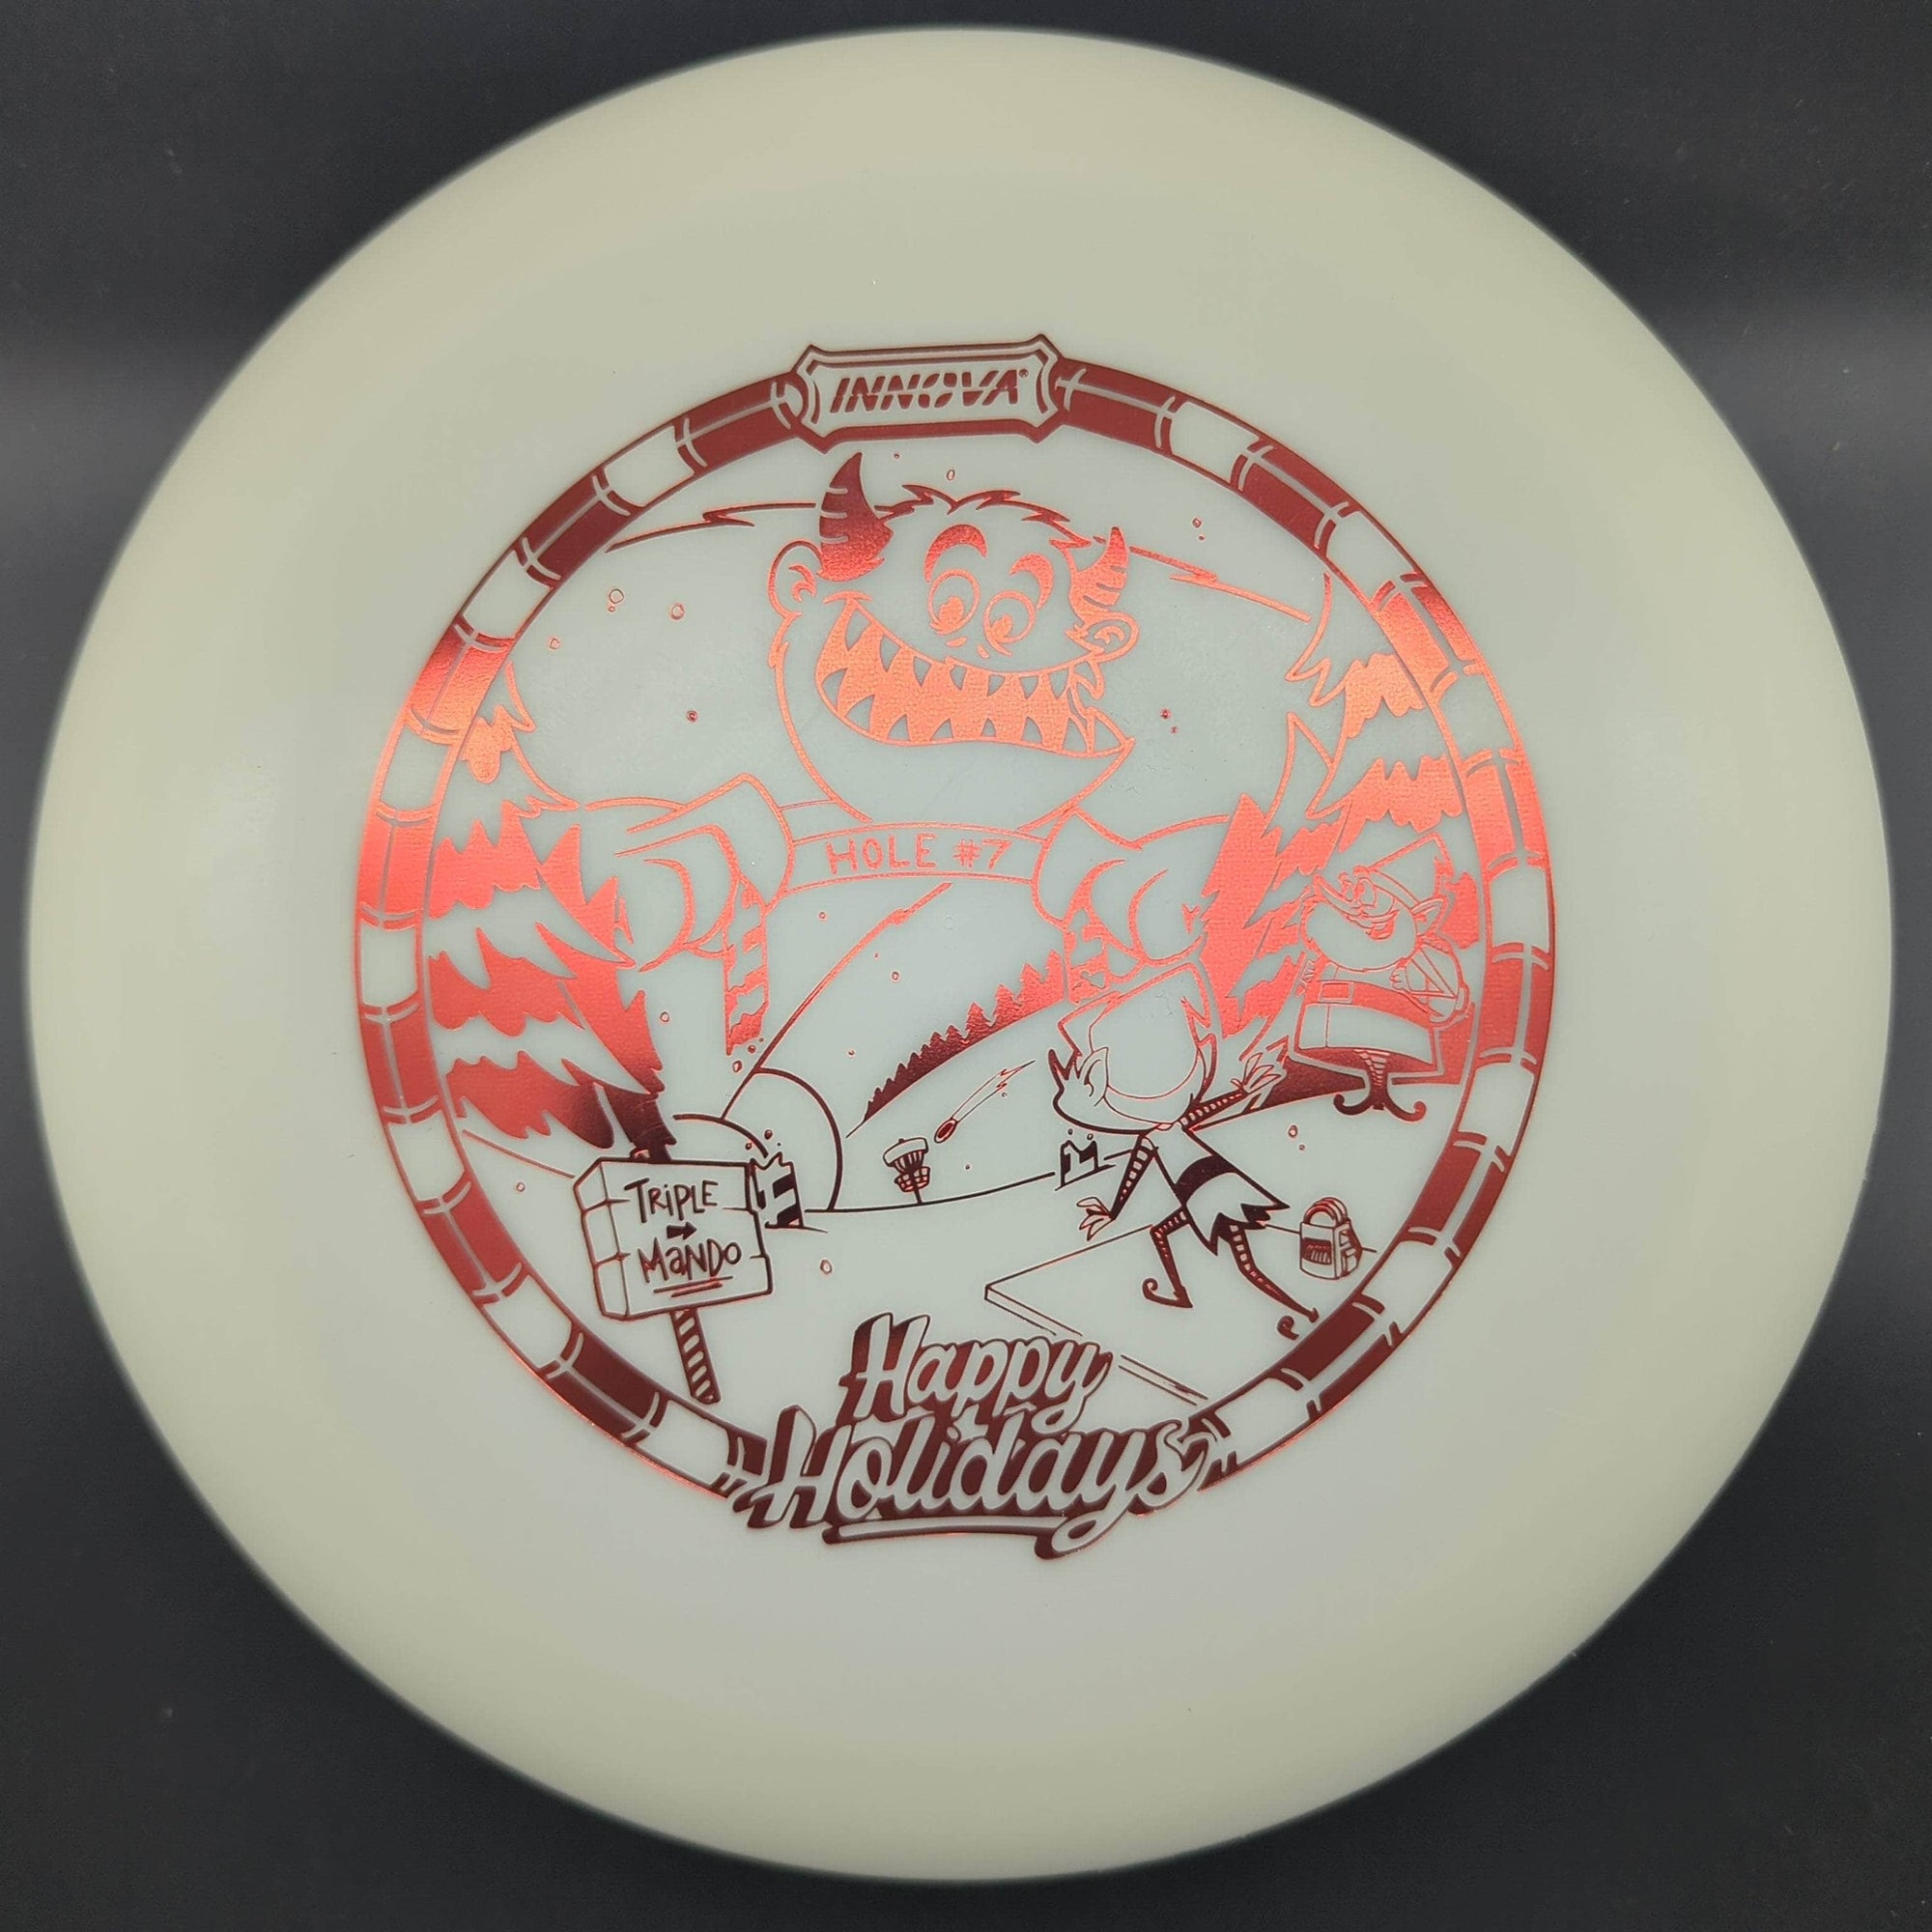 Innova Distance Driver Glow Red Stamp 172g Beast, DX Glow Holiday Stamp